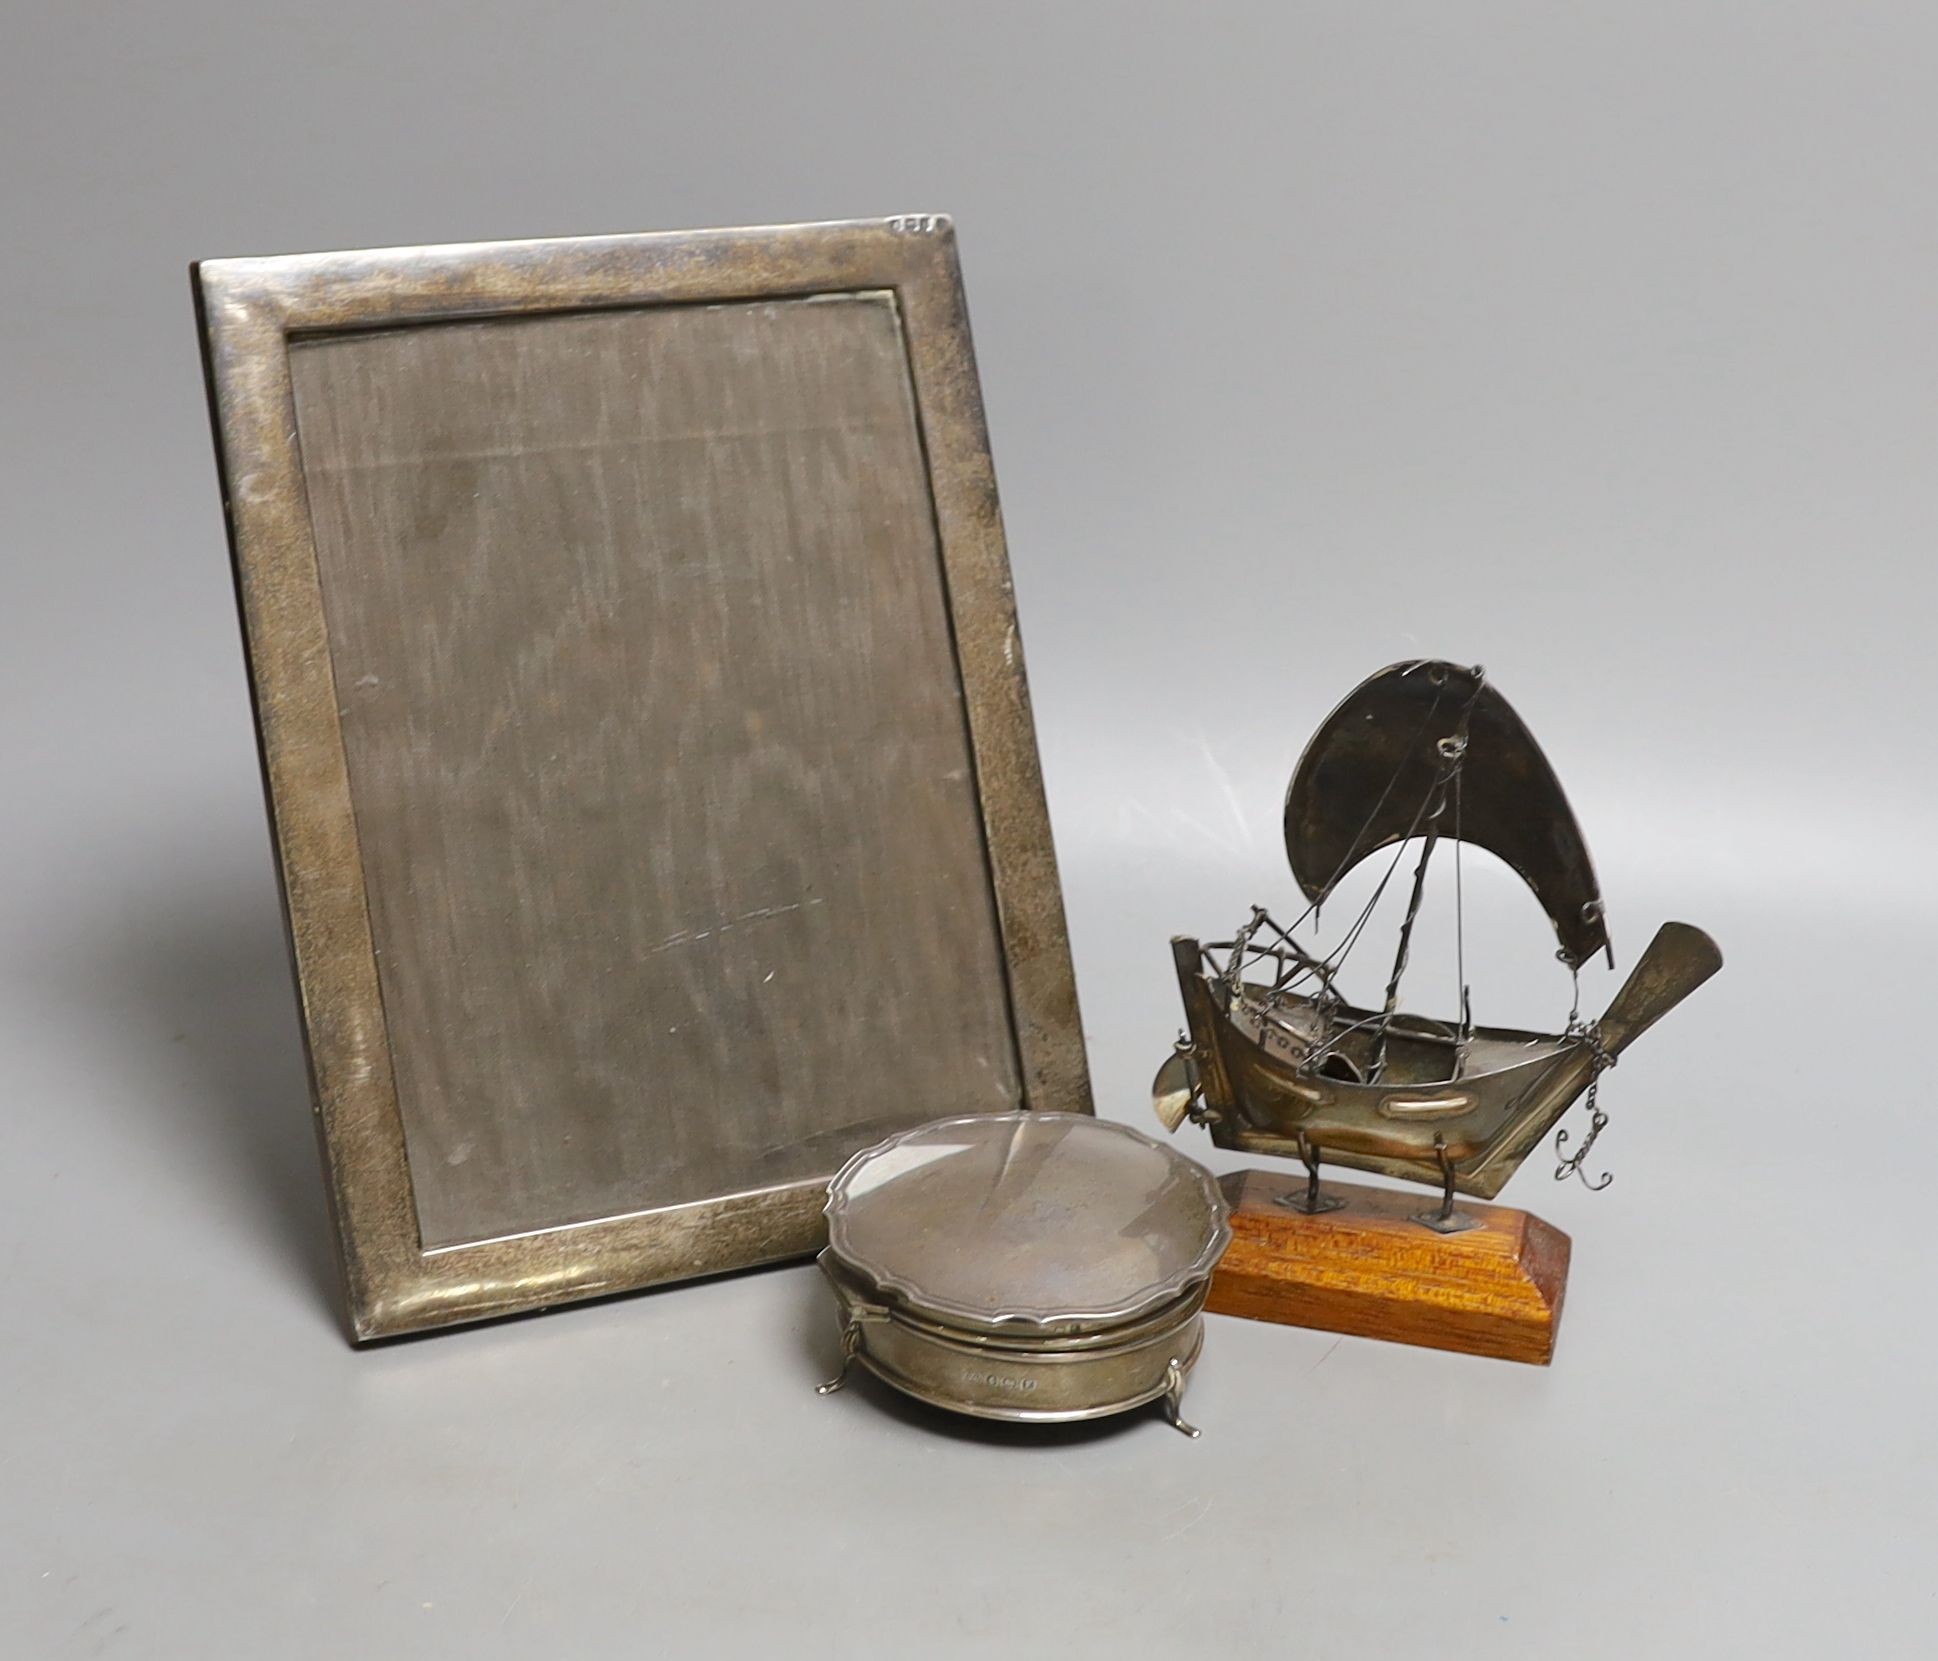 A George V silver mounted rectangular photograph frame, 24.2cm, a 1930's silver trinket box and a miniature white metal model of a sail boat, on wooden stand.